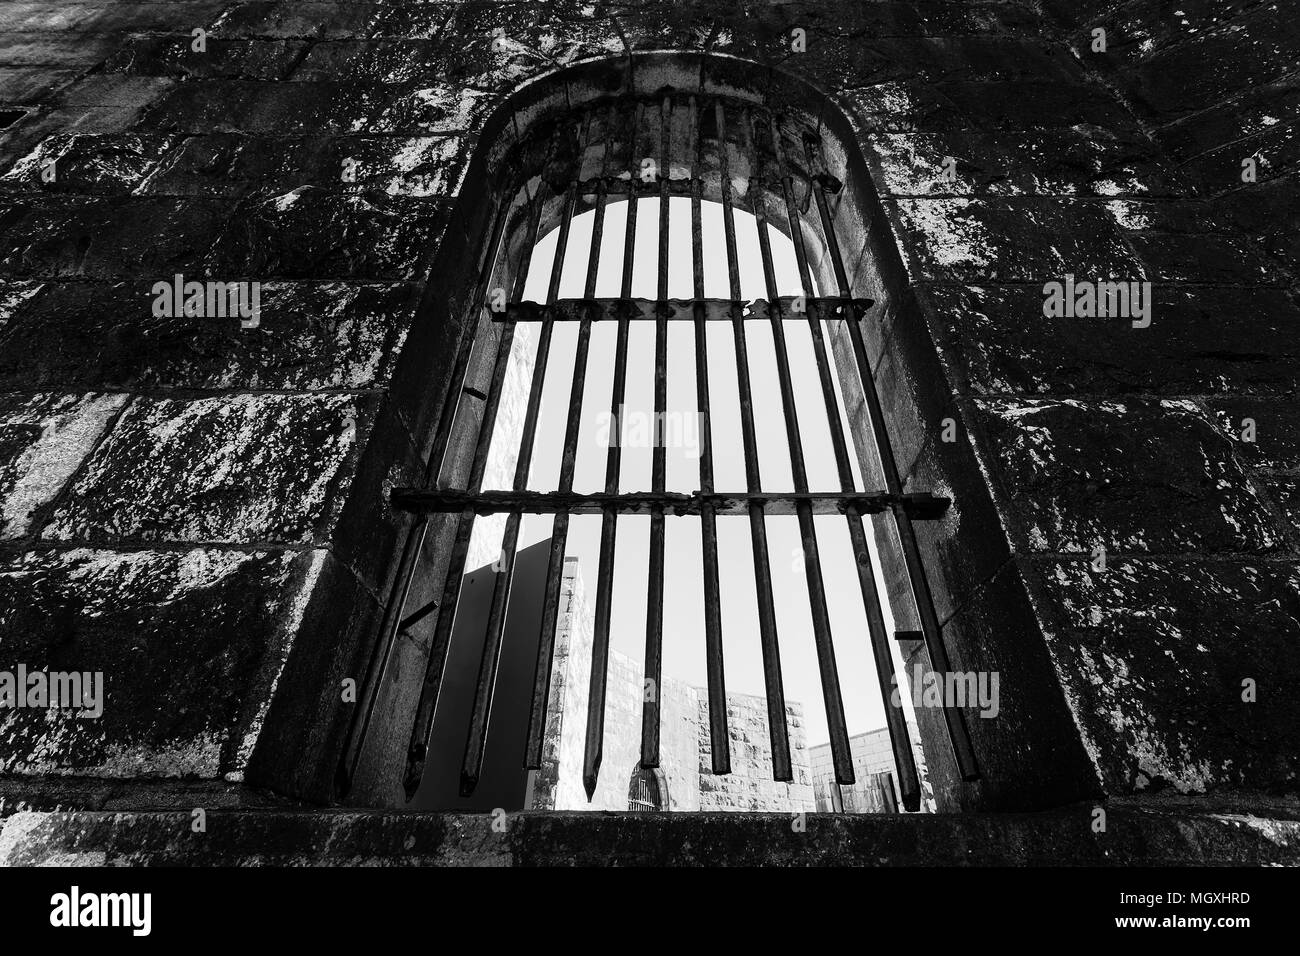 Steel bars on windows in stone brick wall of Trial bay gaol ruins as museum of australian colonial past and heritage. Black-white impression of impris Stock Photo